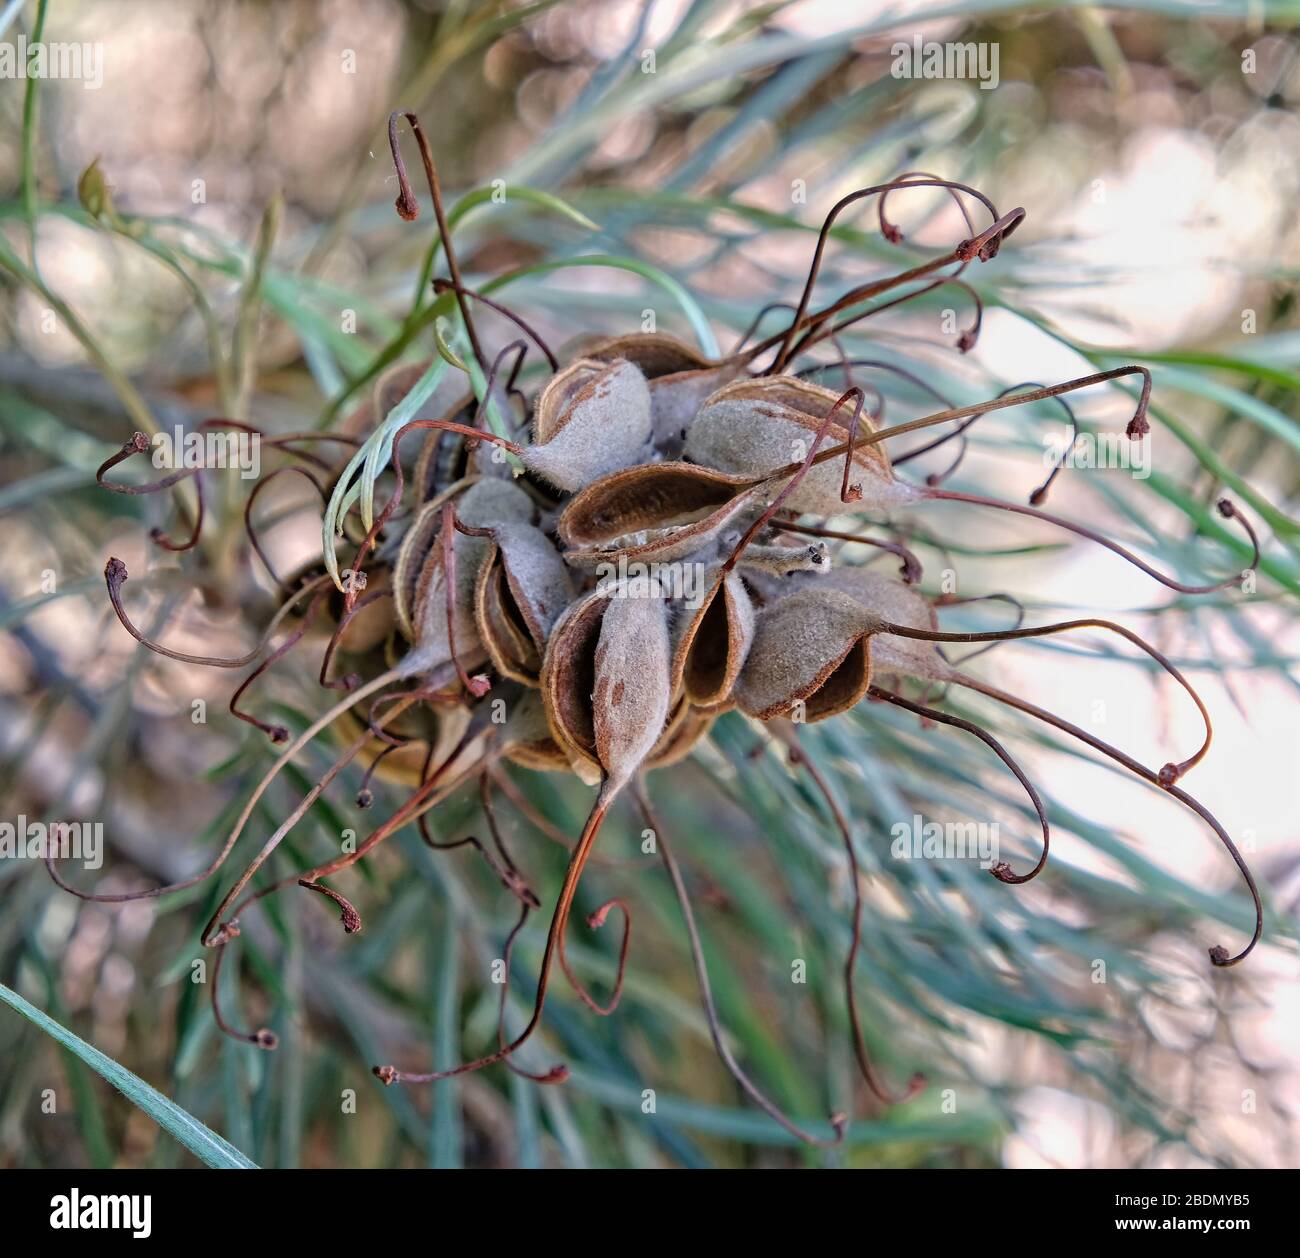 Grevillea flower seed pods, closeup, surrounded by leaves. An Australian native plant. Stock Photo